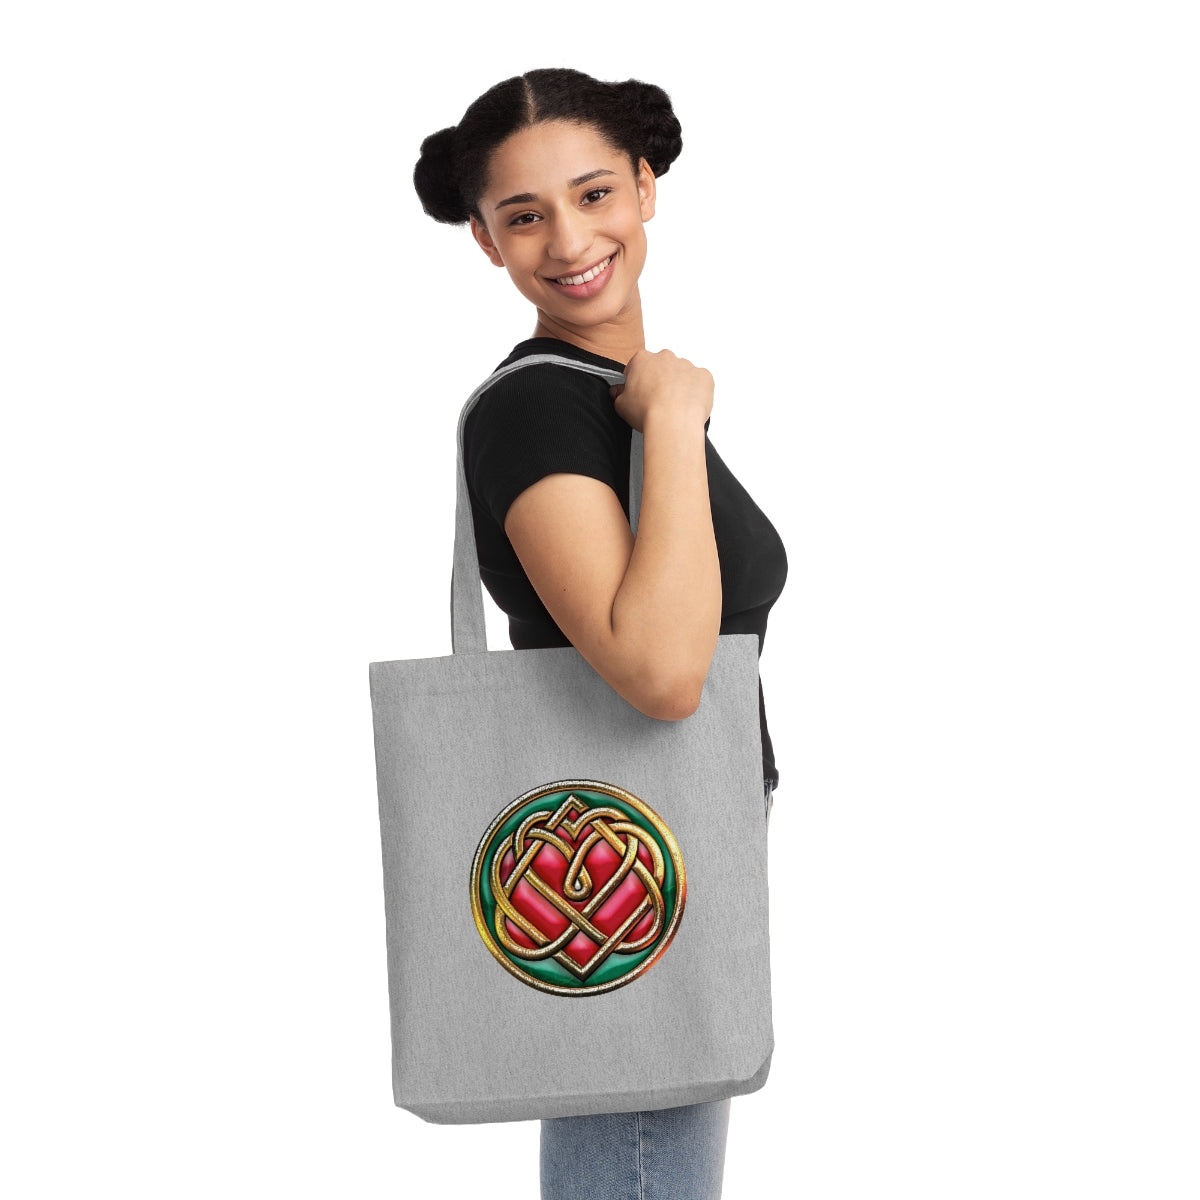 Woven Recycled Tote Bag With Heart Initiation Logo